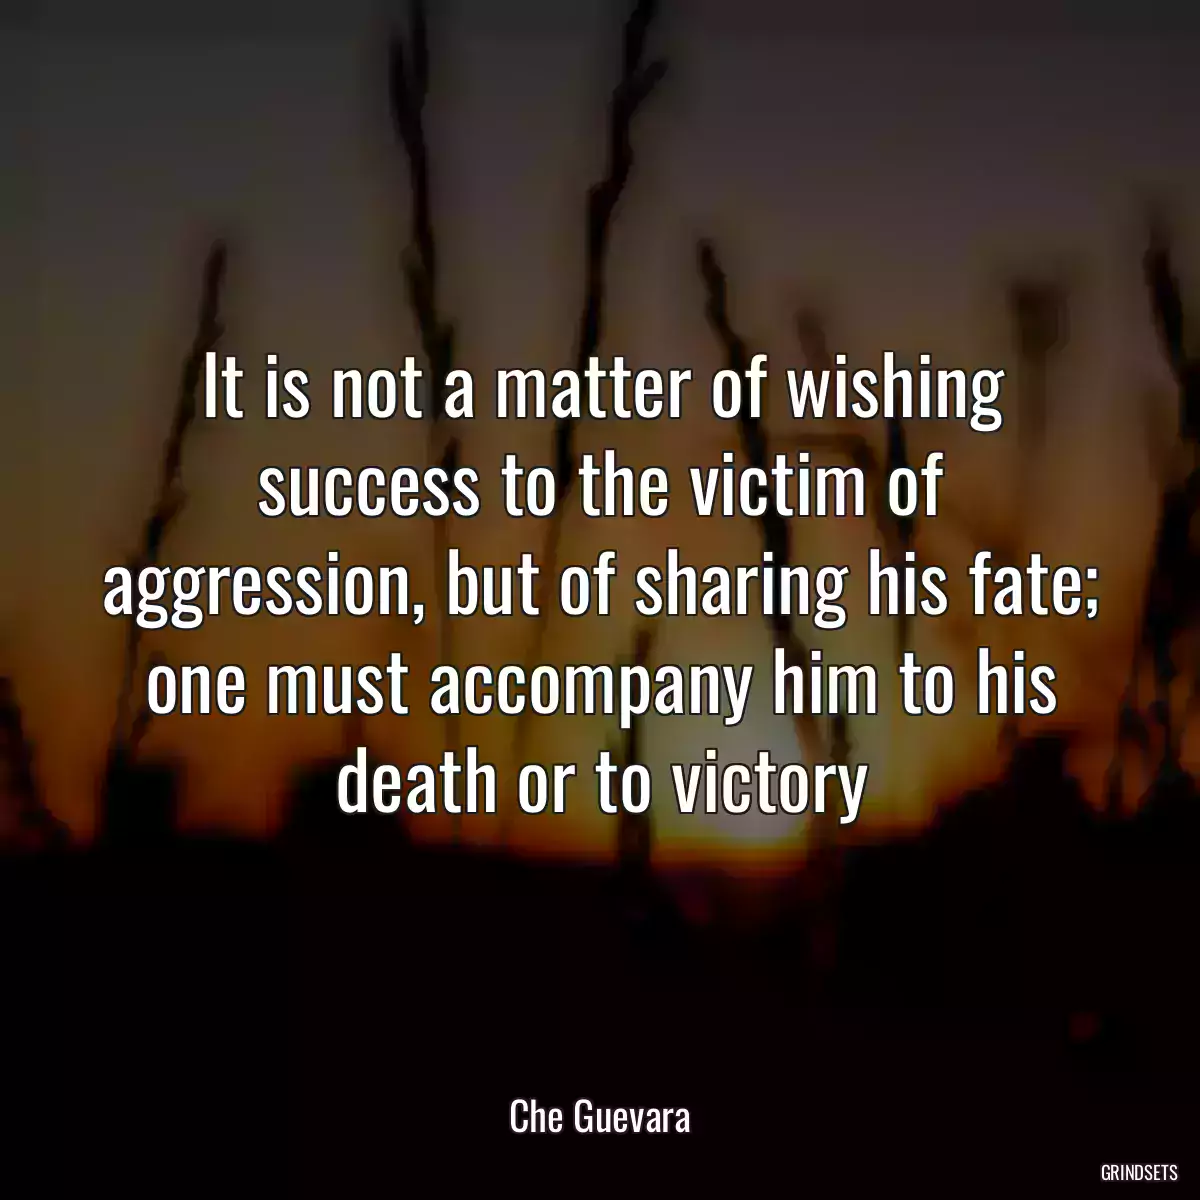 It is not a matter of wishing success to the victim of aggression, but of sharing his fate; one must accompany him to his death or to victory